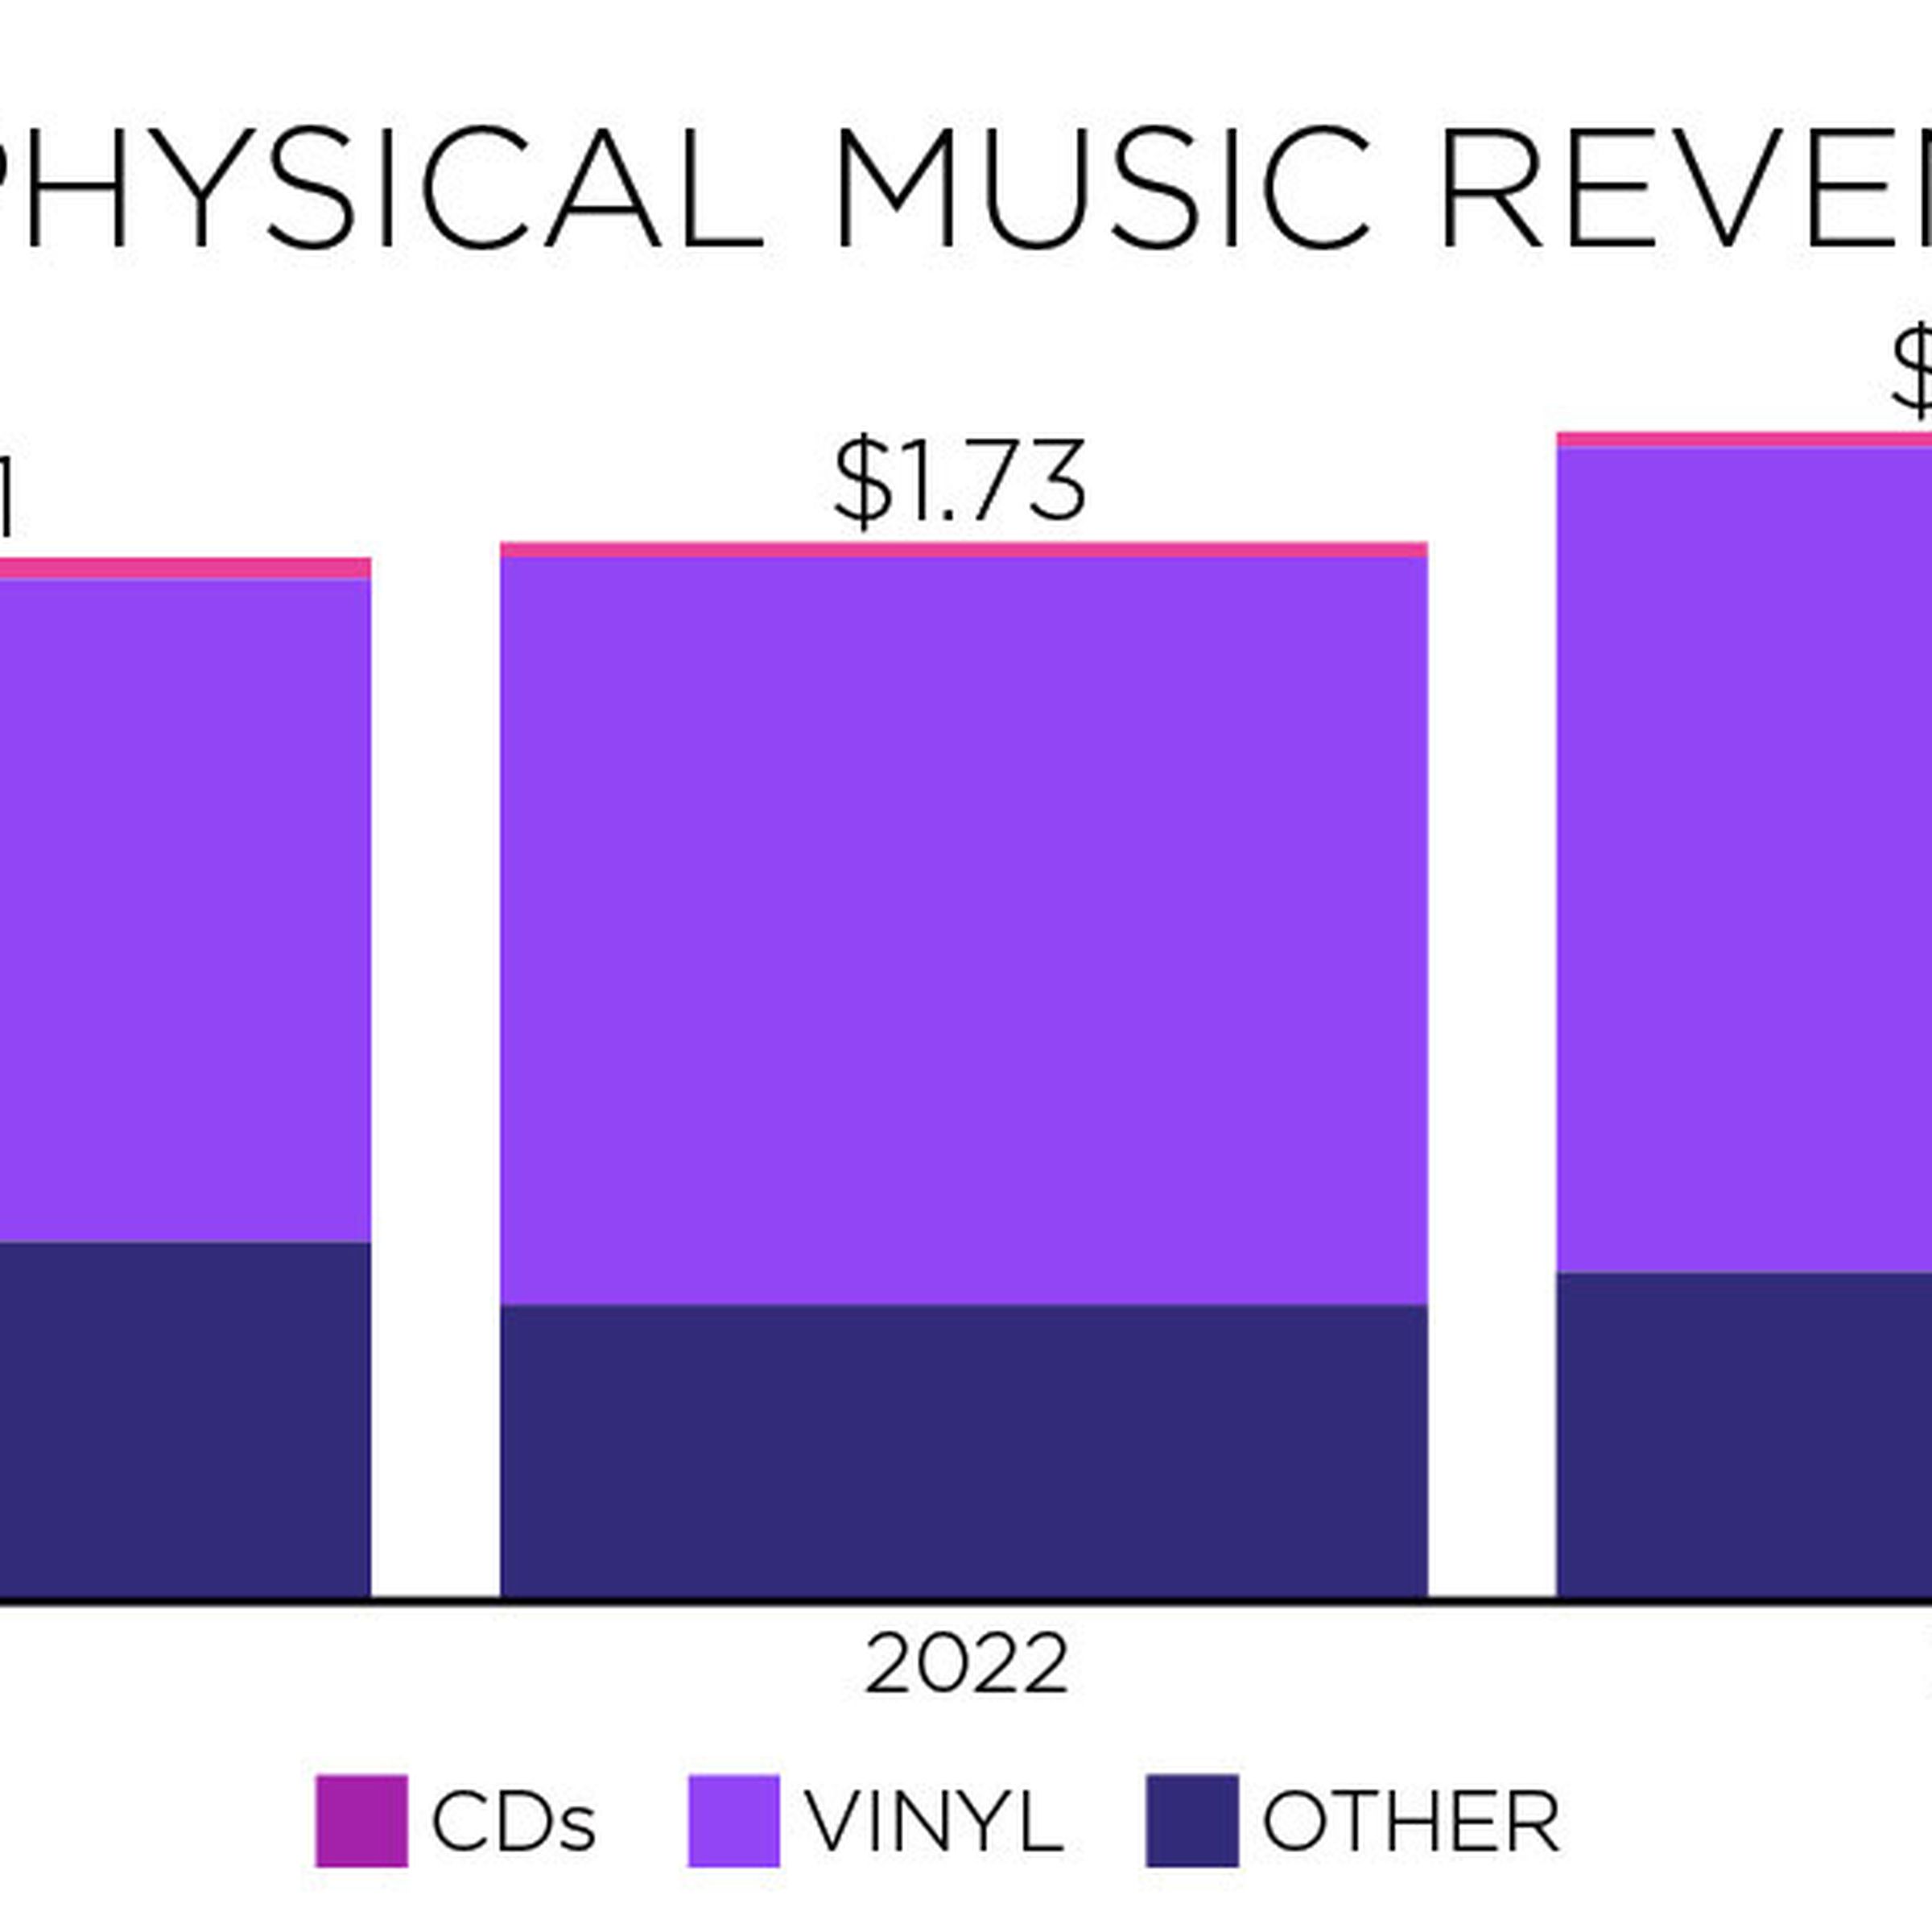 A three-year bar chart showing Vinyl topping physical media growth.